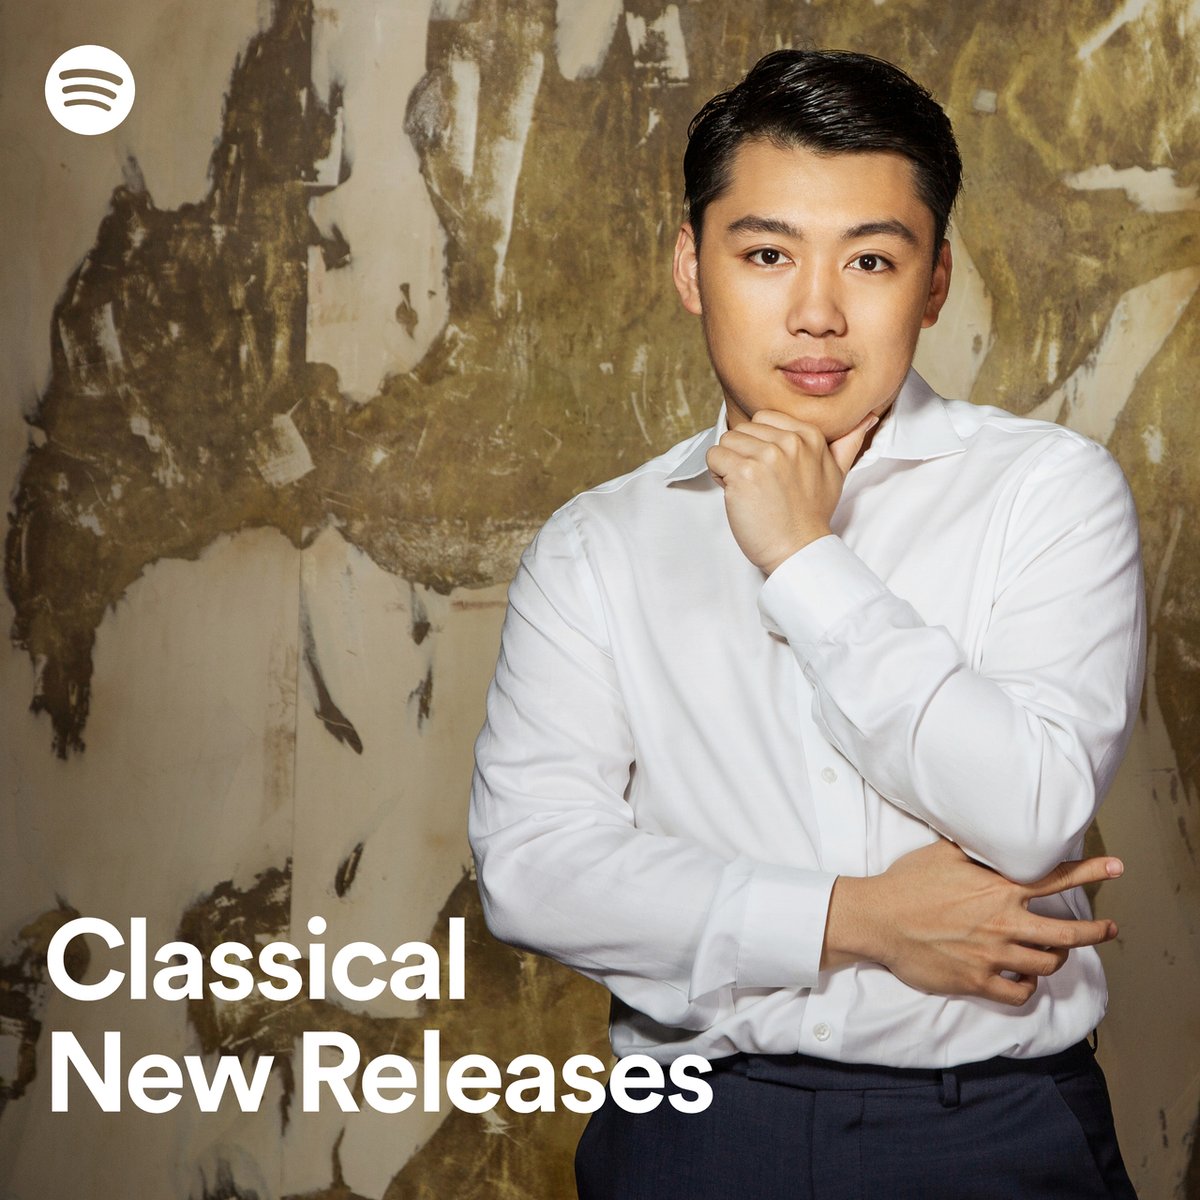 We’re delighted to see Li appear on the cover of Spotify’s Classical New Release playlist for this week. Hear his recording of Schumann’s Arabesque in C Major along with a whole host of other new tracks. 🎧 on Spotify lnk.to/cnr 🎧 w.lnk.to/movements